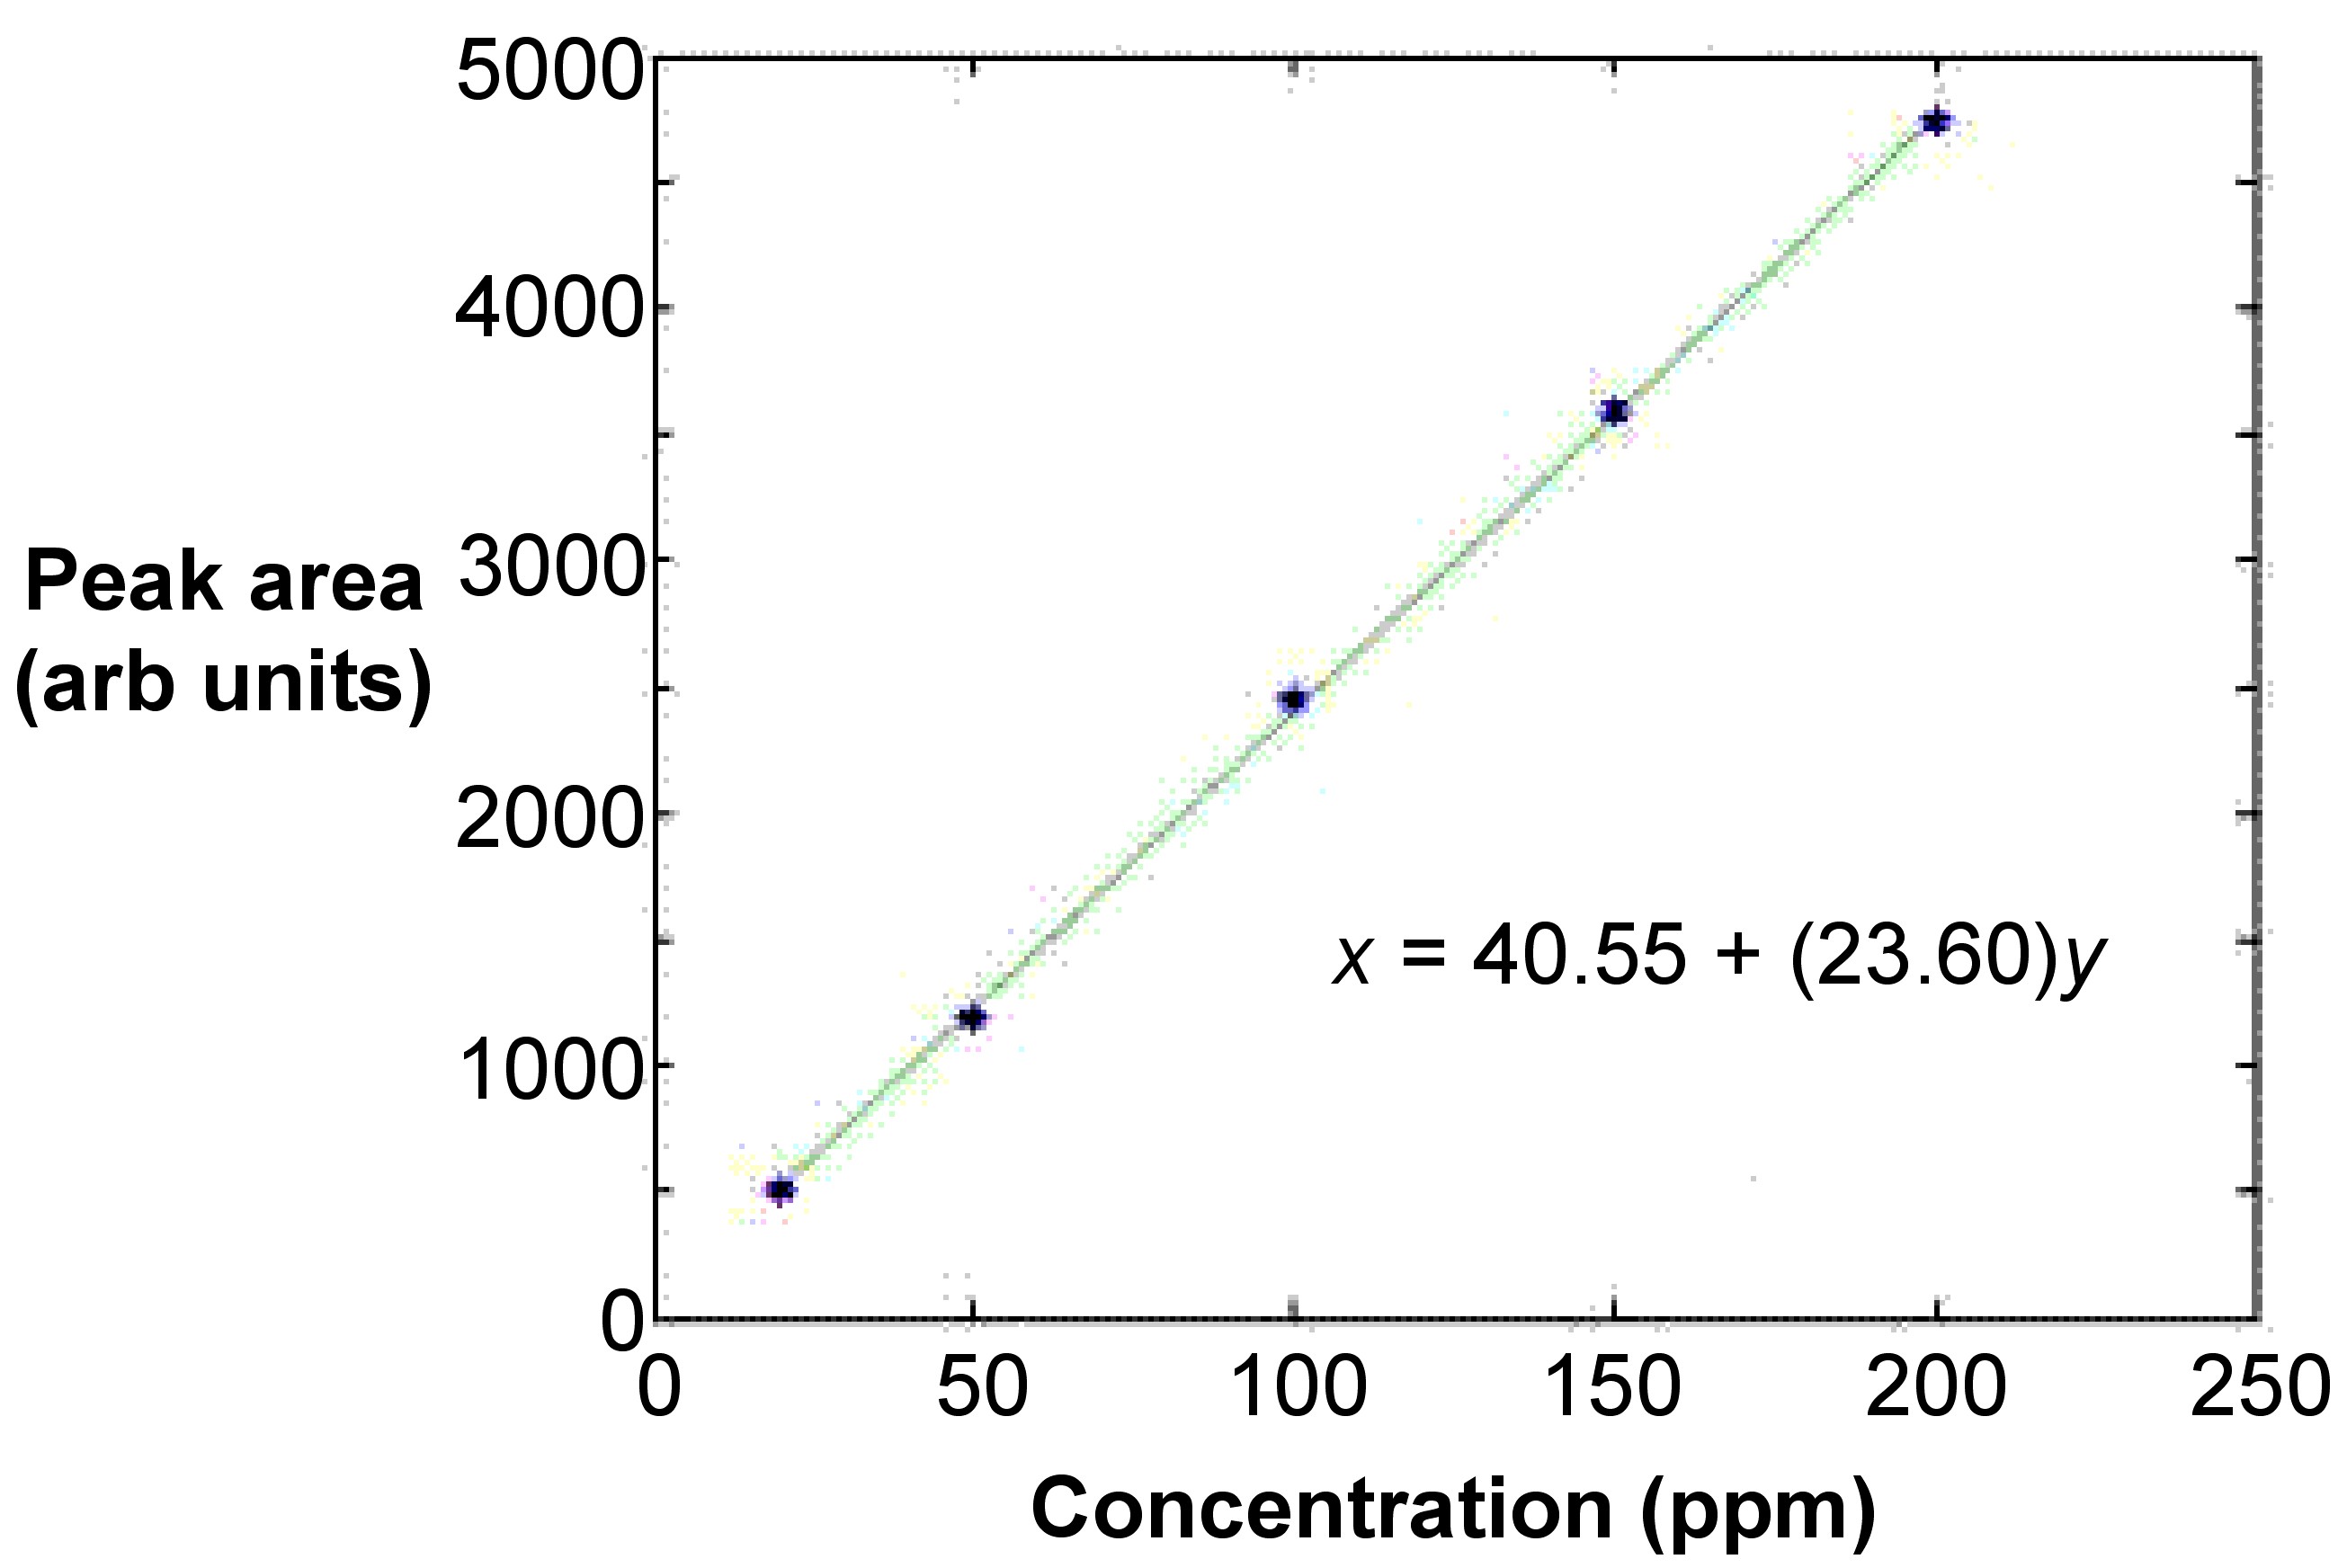 An example of a calibration curve made for the standard calibration technique.